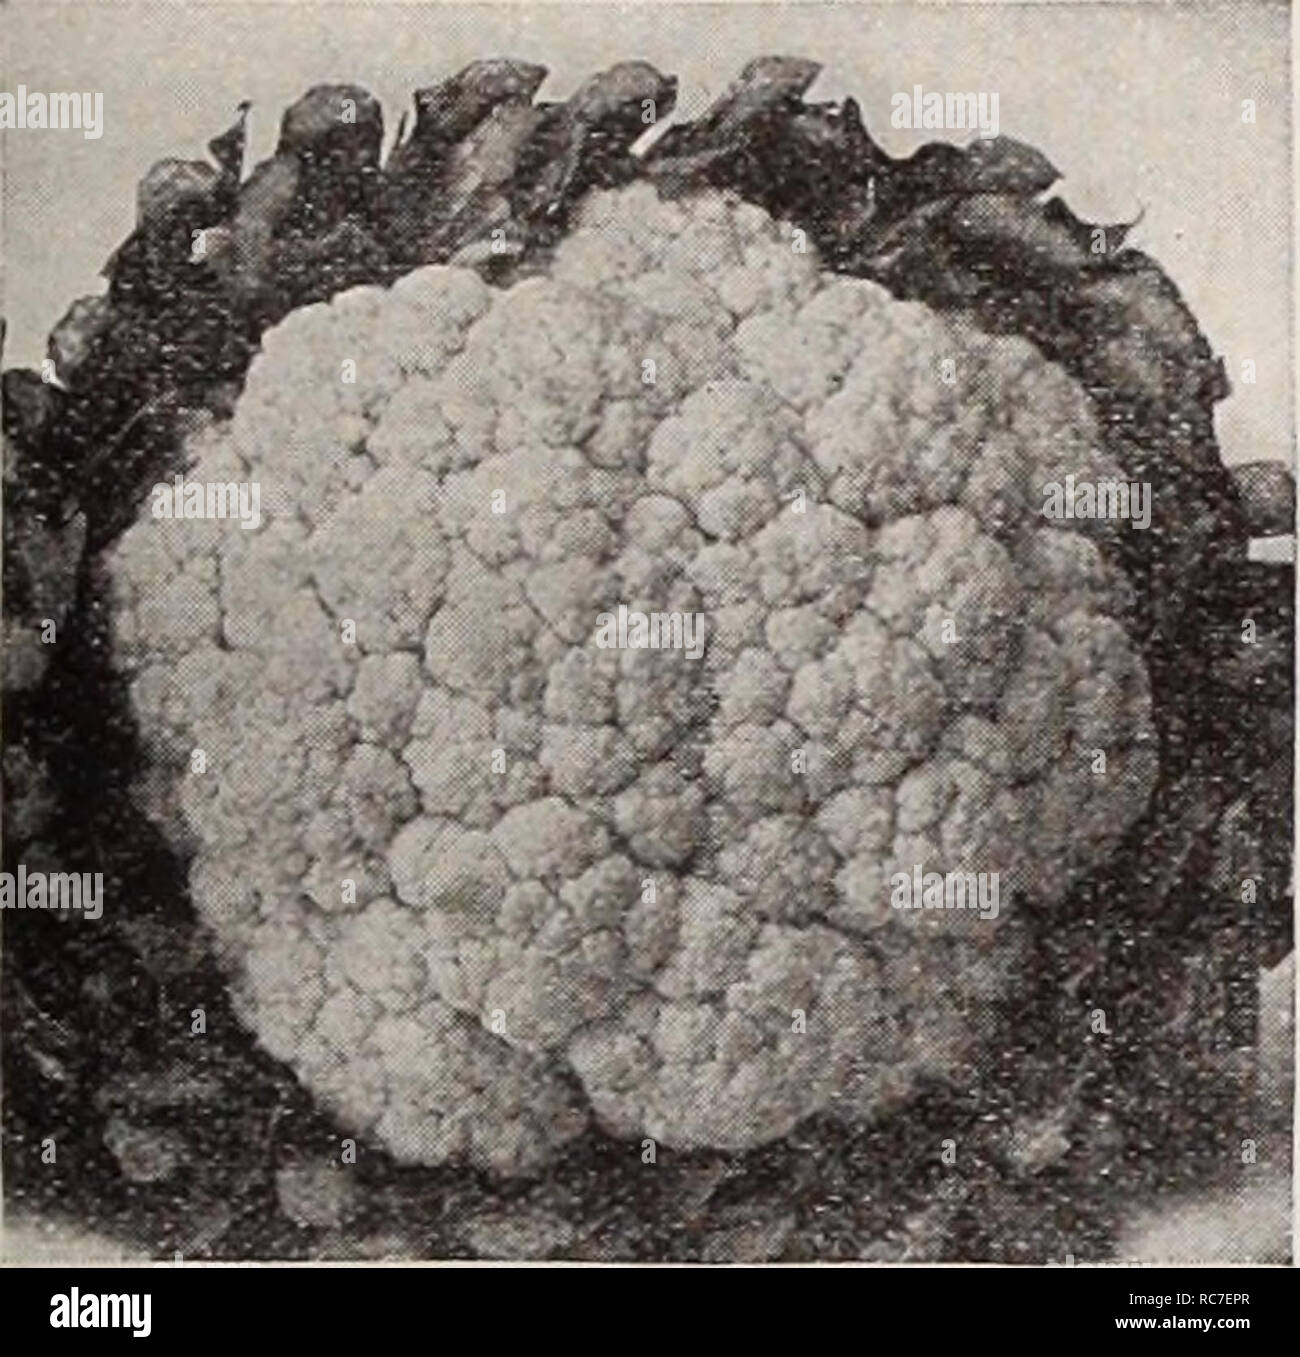 . Dreer's garden book / Henry A. Dreer.. Nursery Catalogue. IK RELIABLE VEGETABLE SEEDJ/i ?PHMiPHM 17 Chou-fleur, Fr. Cavol-fiore, Ital. Cauliflower Coliflor, Sp. Blumenkohl, Ger. Culture —For earliest Cauliflower, raise plants by sowing in hotbed or greenhouse during January or February, and transplant to flats or cold frames, 2 or 3 inches apart each way. Set in open ground as soon in spring as the land can be put in good order. Soil to be a warm, very rich, fibrous loam, well supplied with humus and moisture. Copious water applications during dry weather, especially when the plants are hea Stock Photo